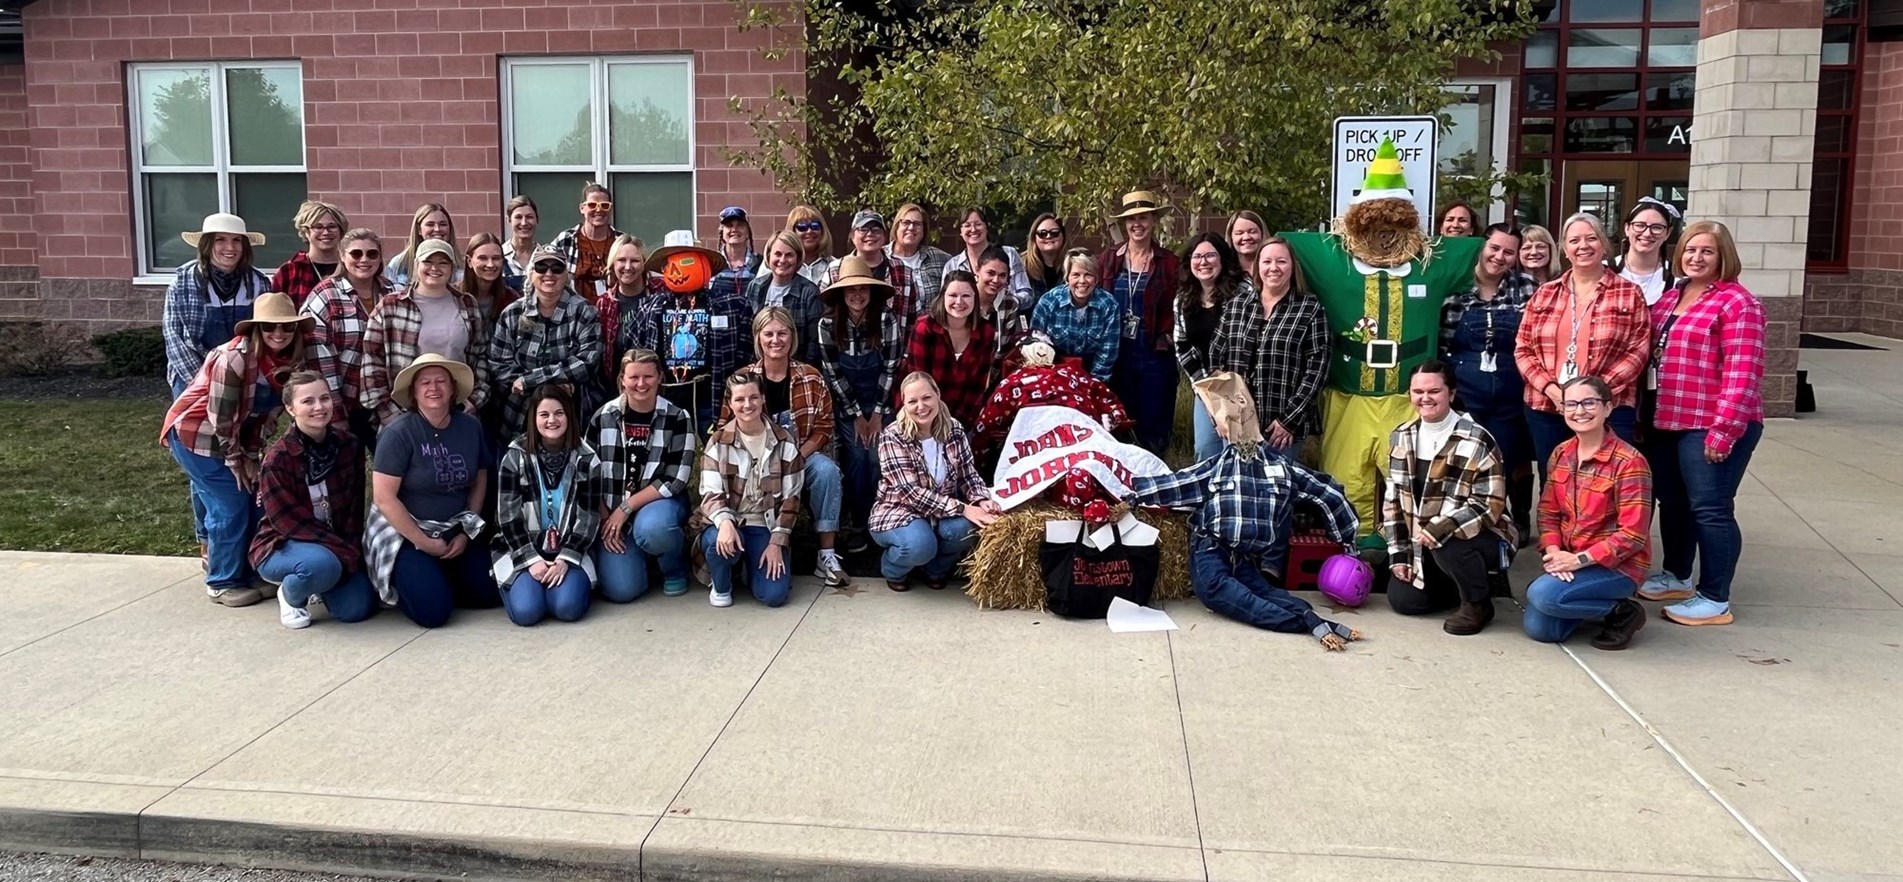 Elementary staff members dress in flannel and farm apparel for Dress for a Farmer Day, posing with scarecrows in front of elementary school